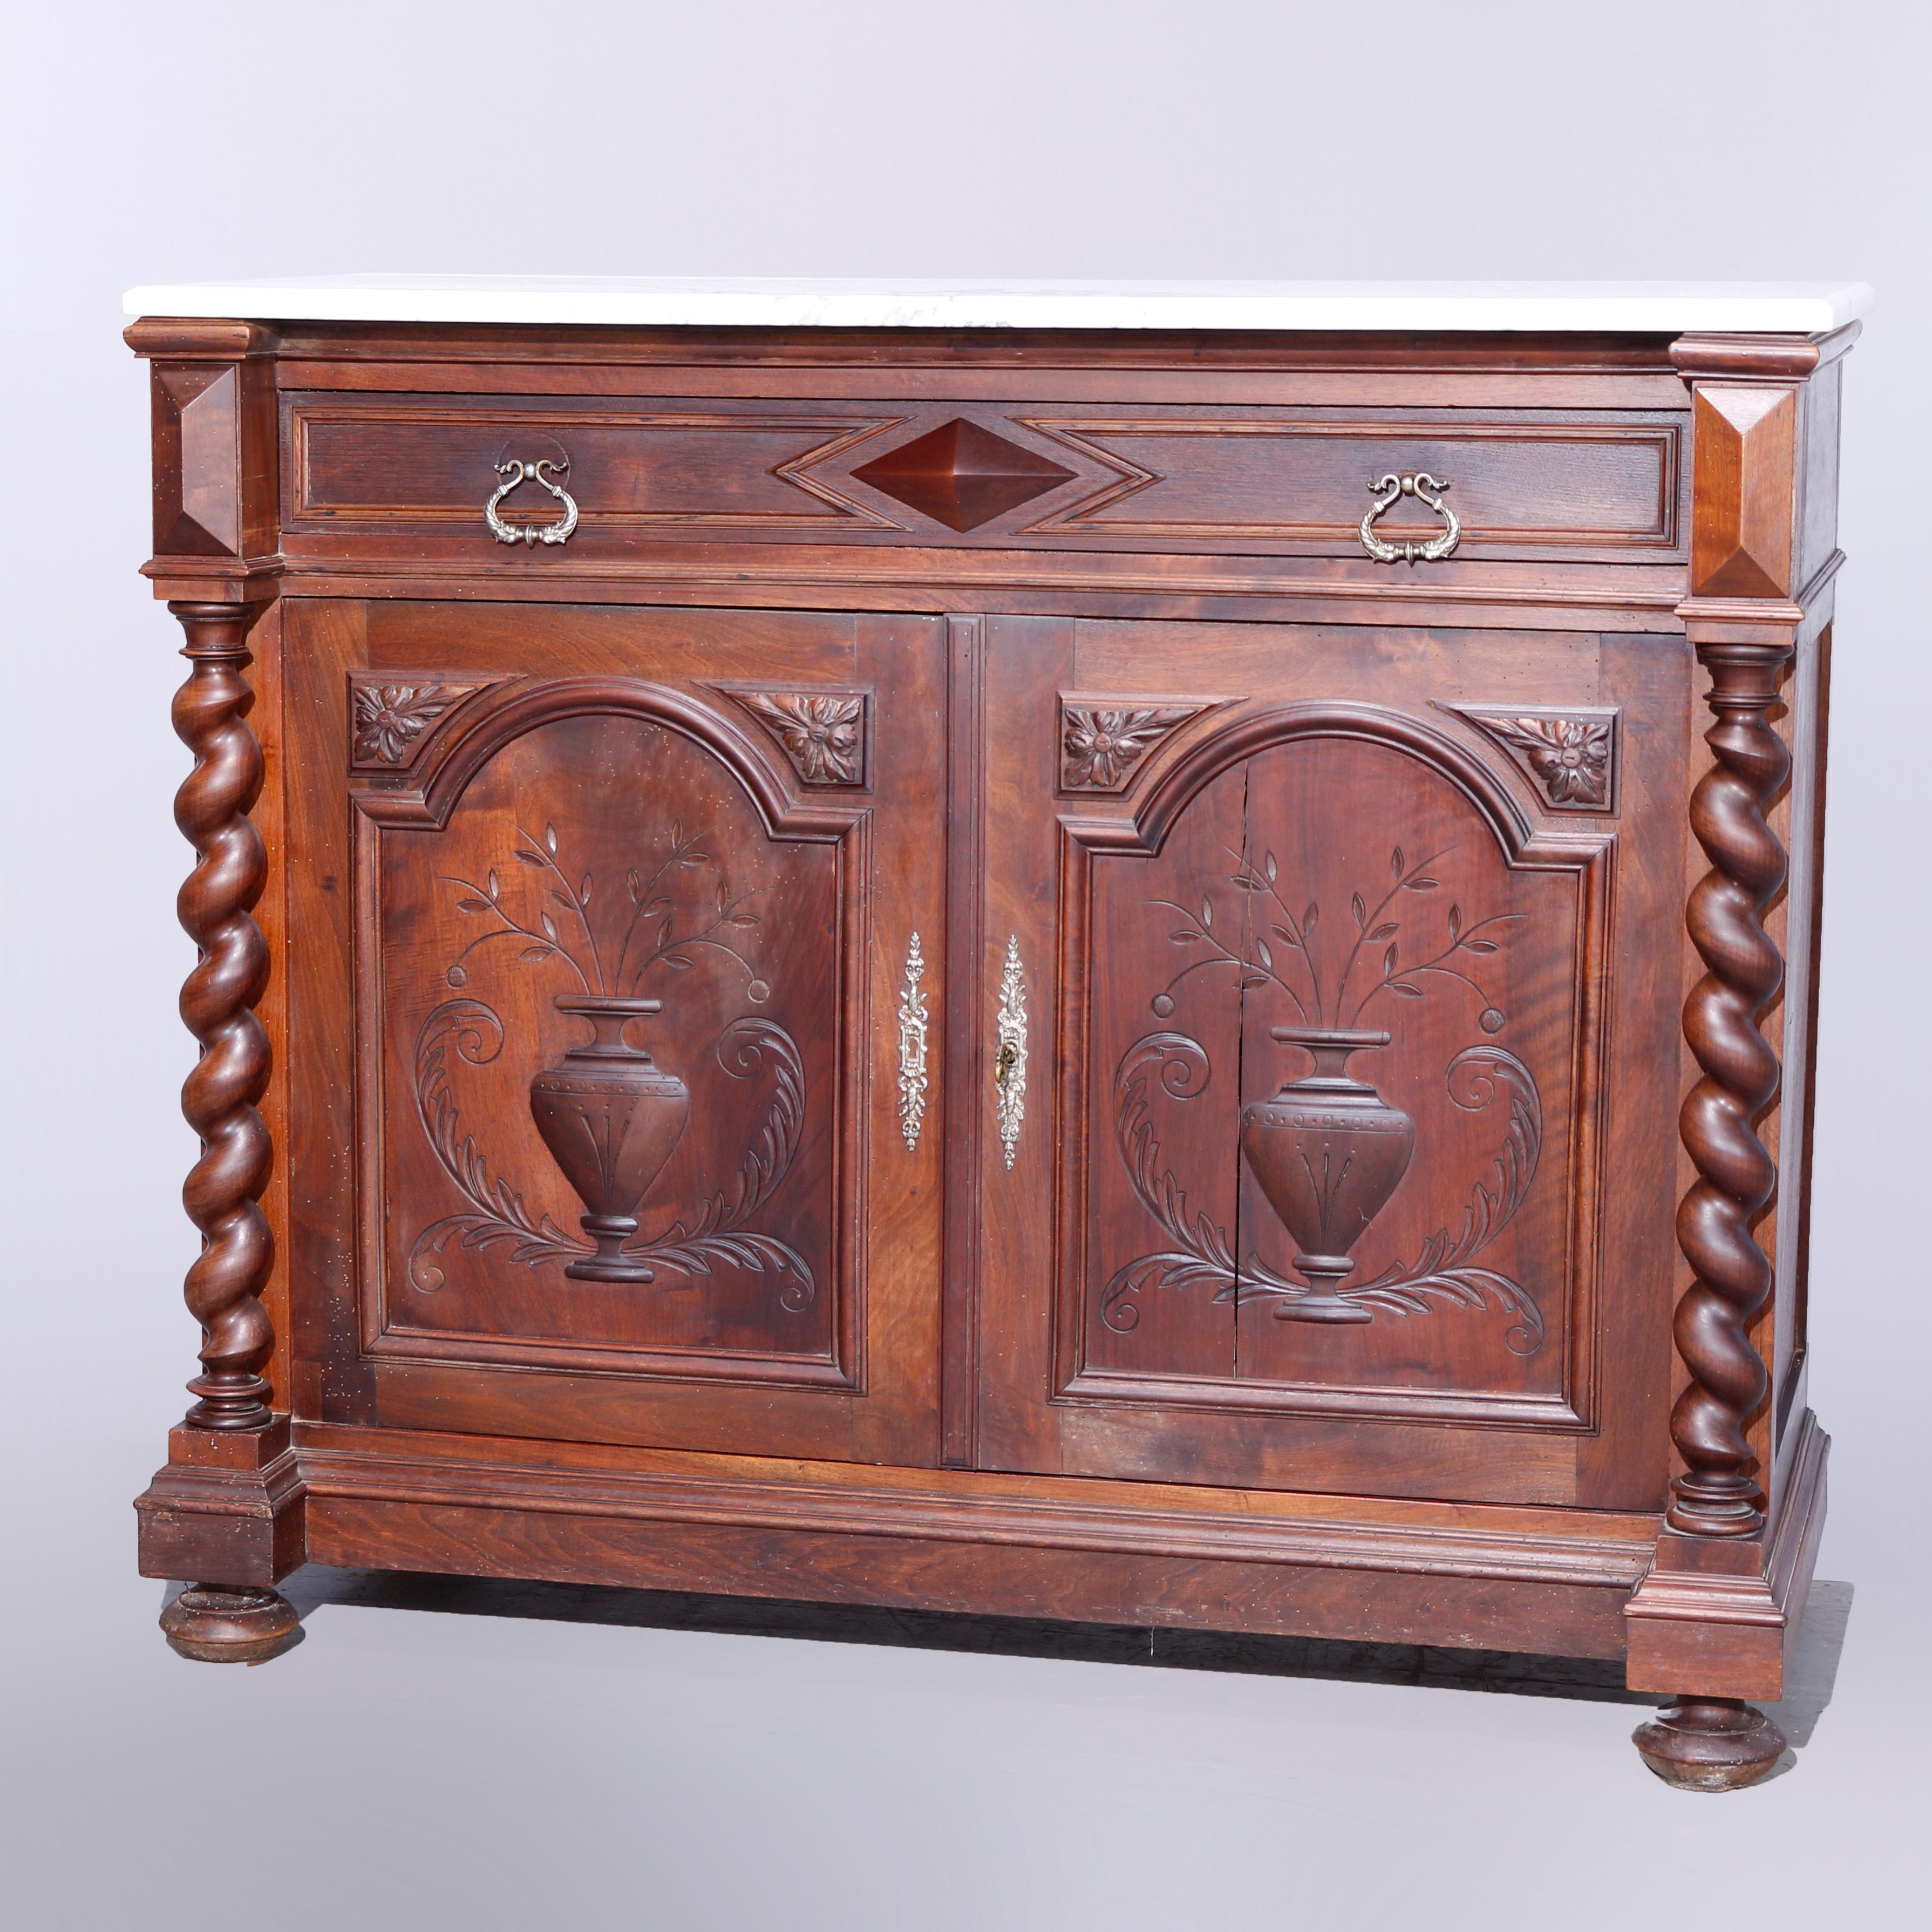 An antique English Elizabethan sideboard offers beveled marble top over case with frieze drawer having central pyramidal element surmounting cabinet with double doors having carved floral urn decoration opening to a shelved interior and flanked by